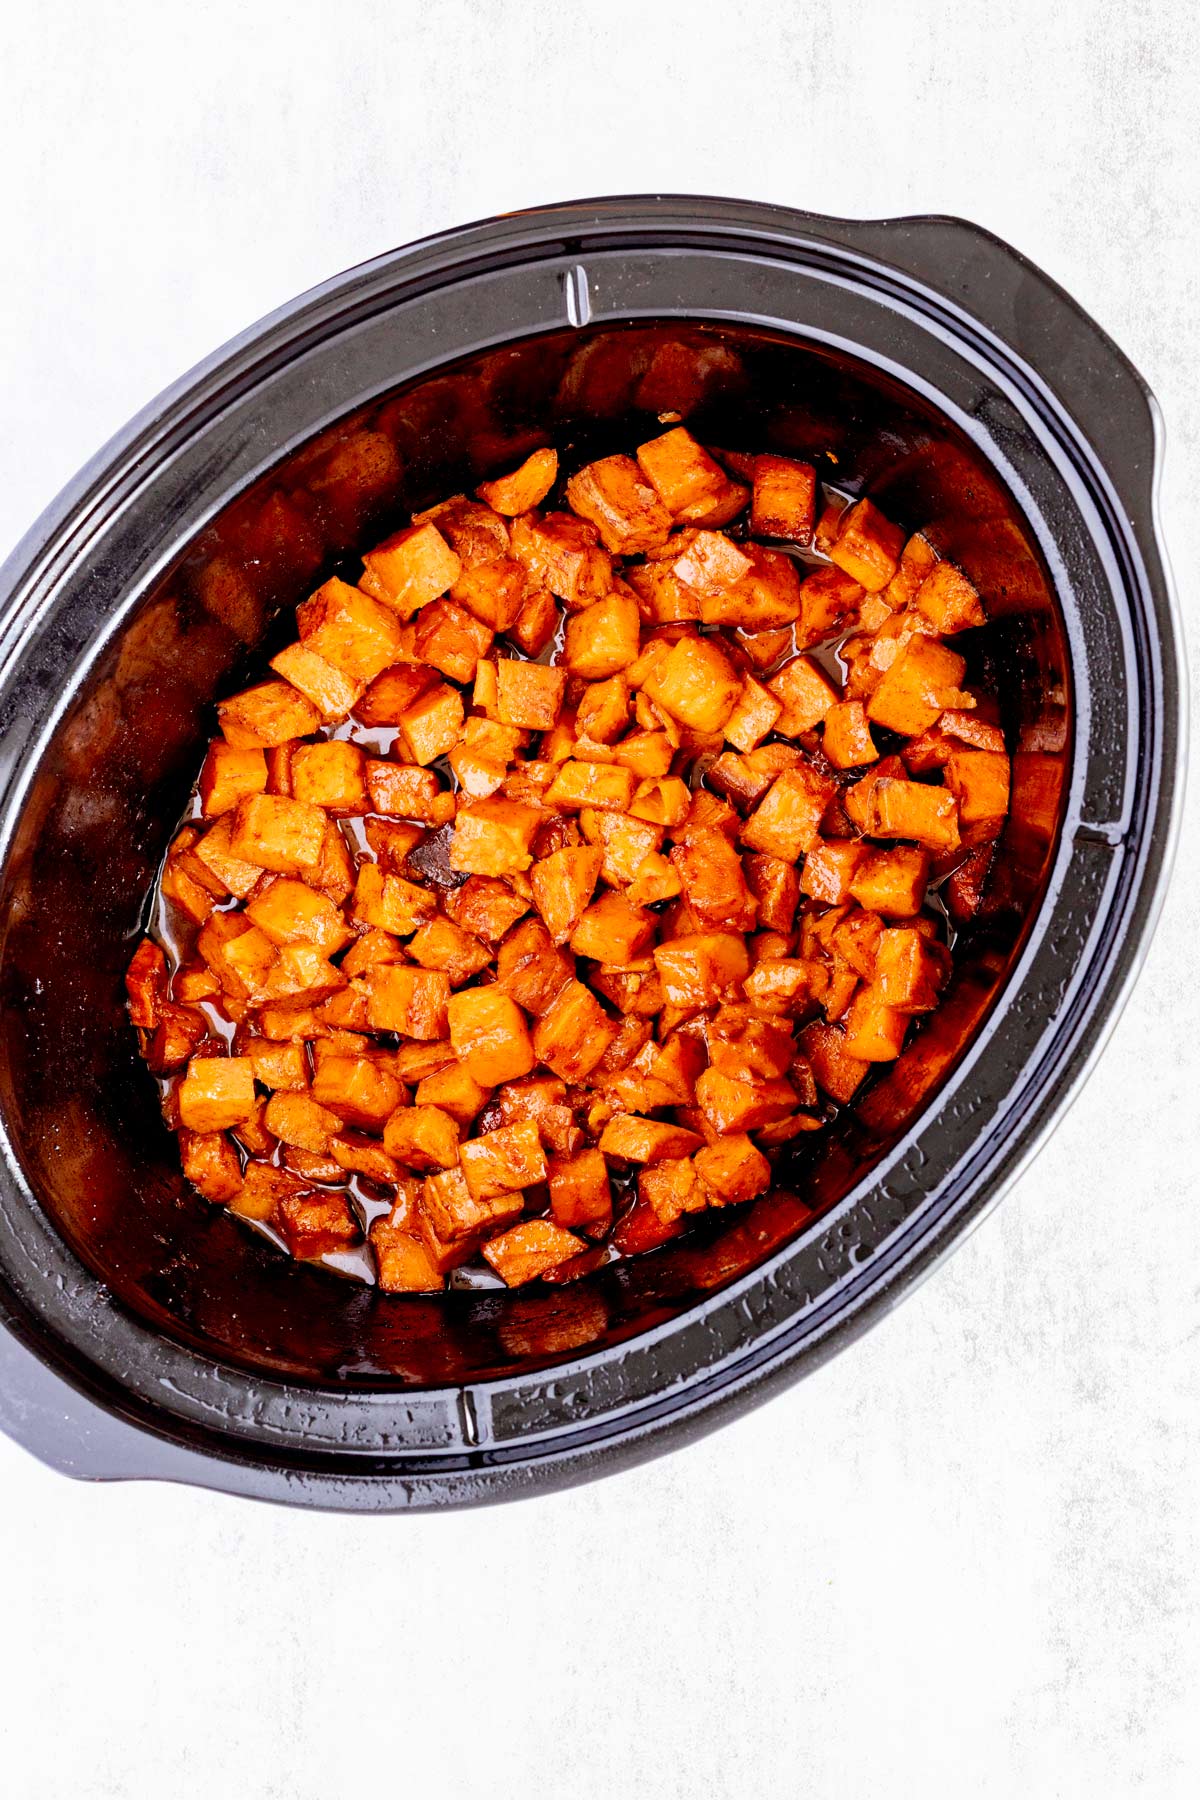 Sweet potato cubes that have been cooked in a slow cooker.